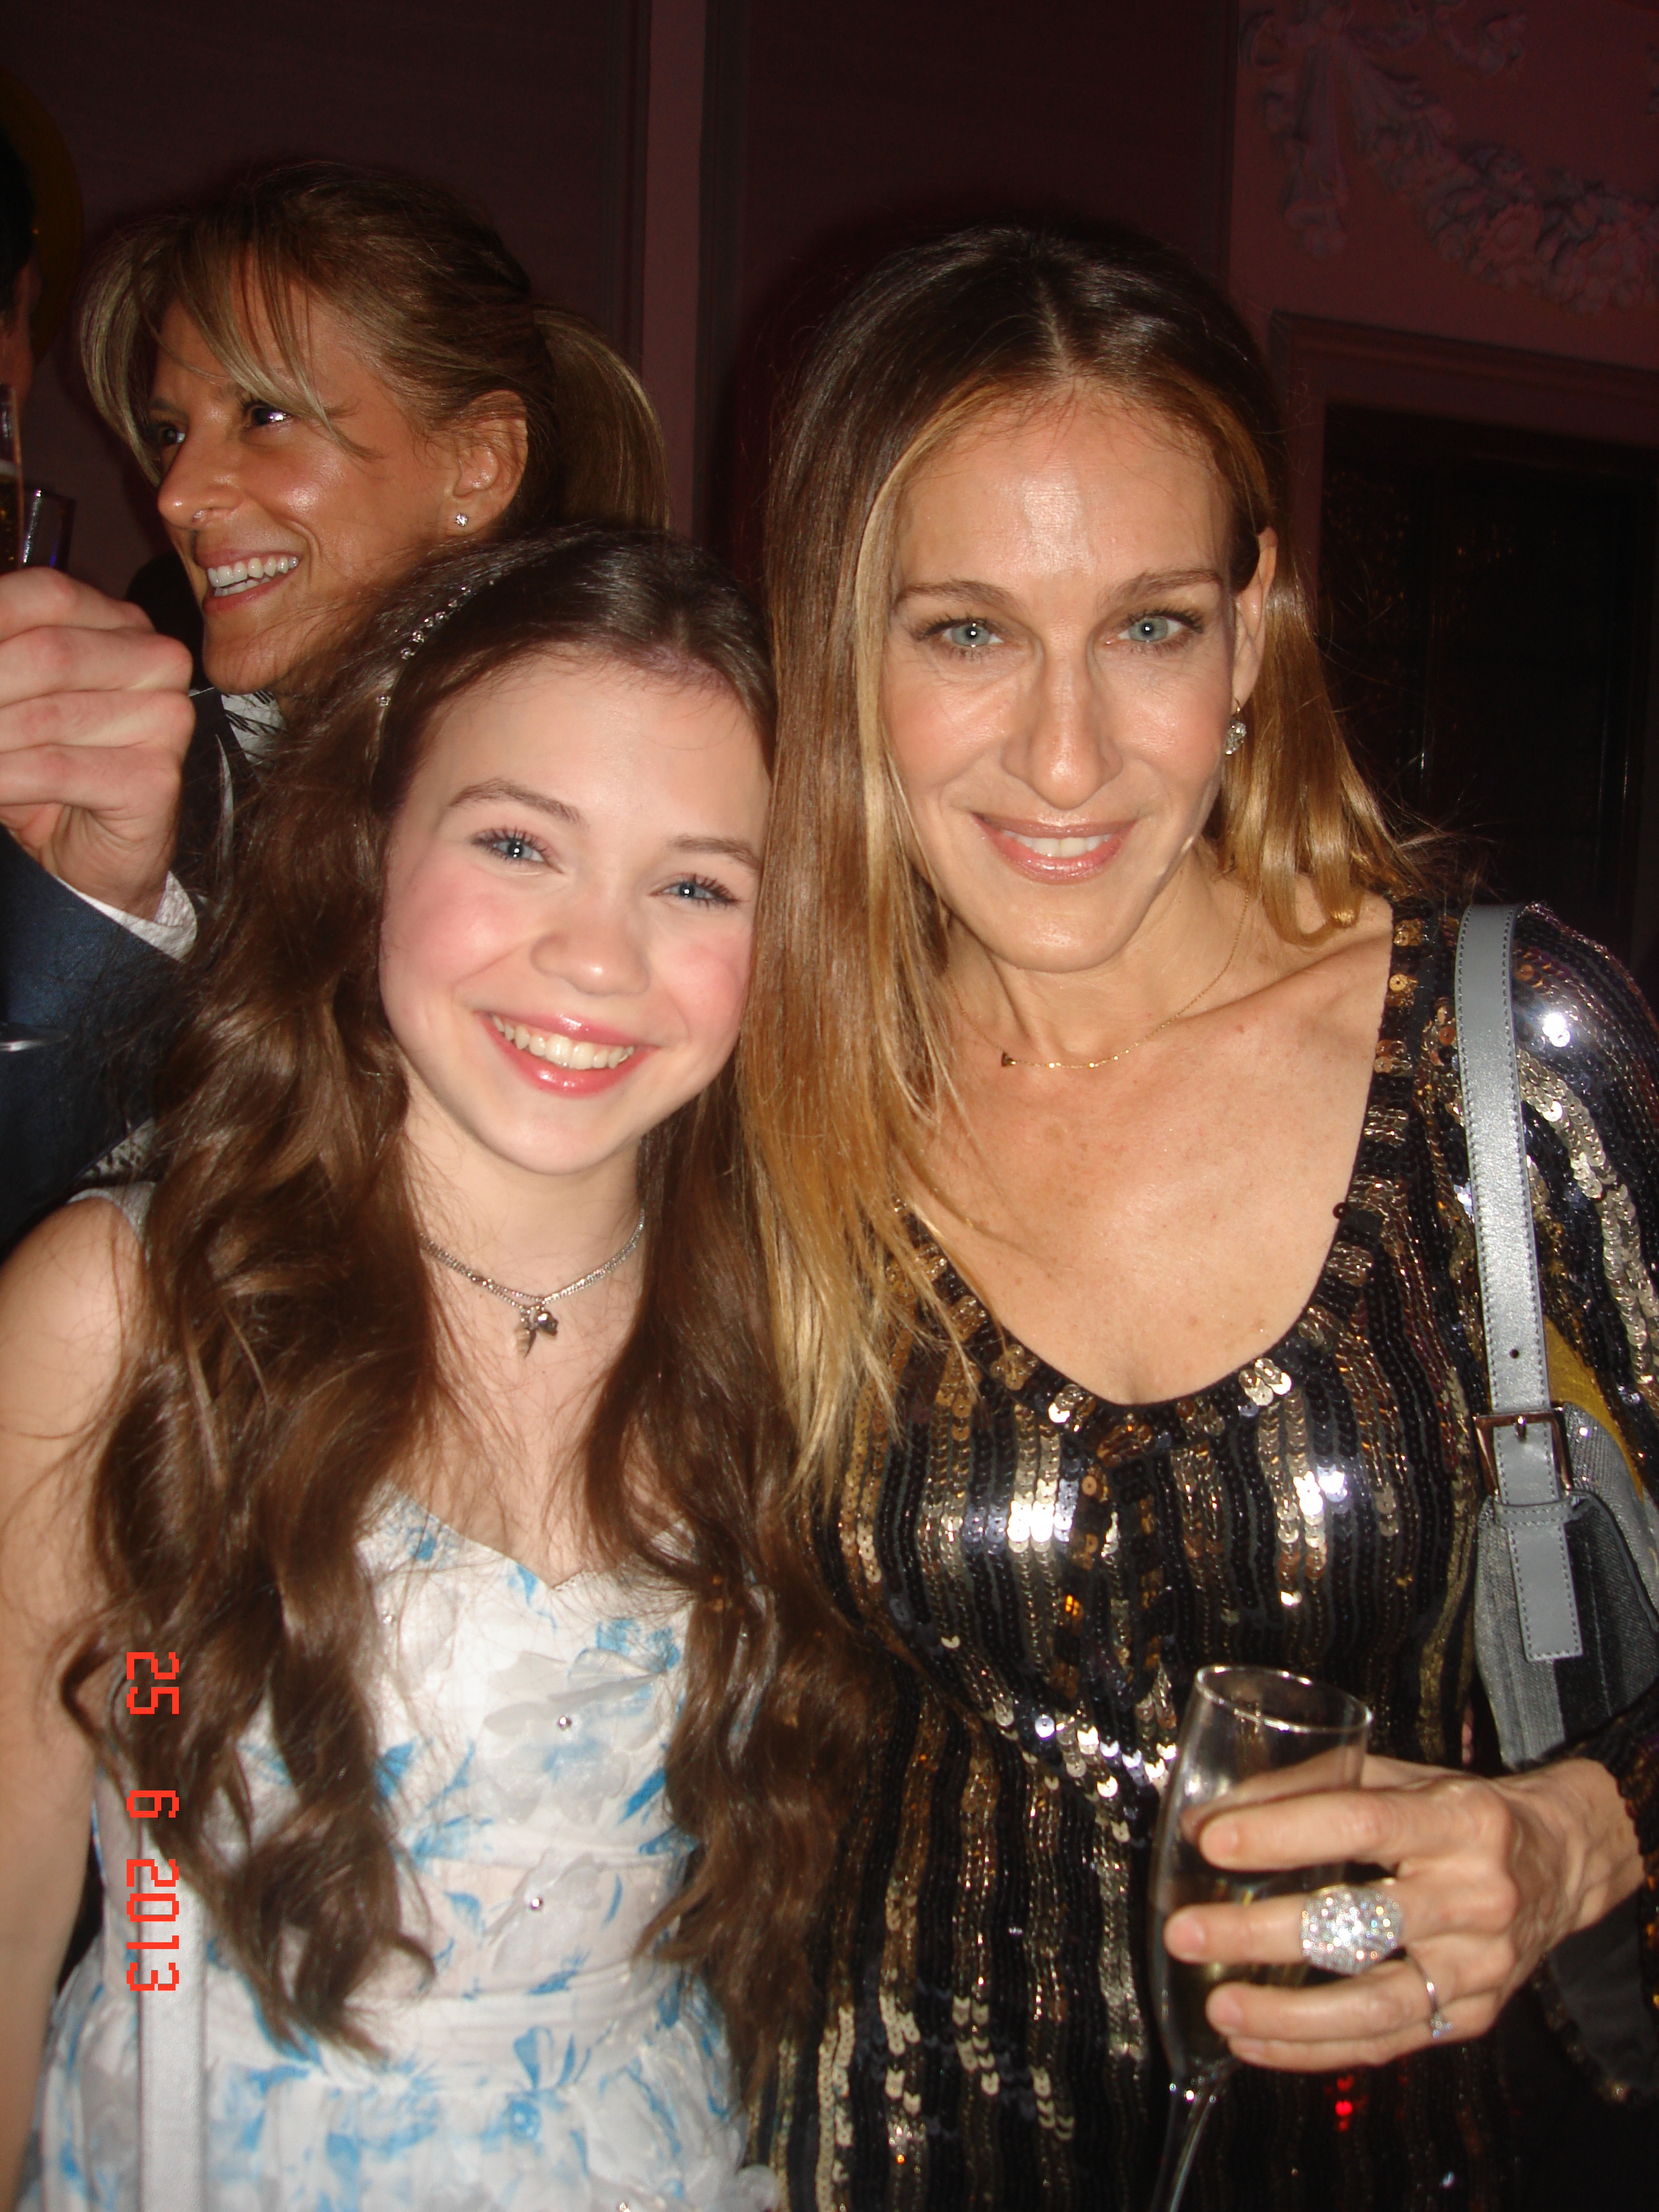 With Sarah Jessica Parker at the opening & Press night of 'Charlie and the Chocolate Factory' in London's West End on 25 June 2013.